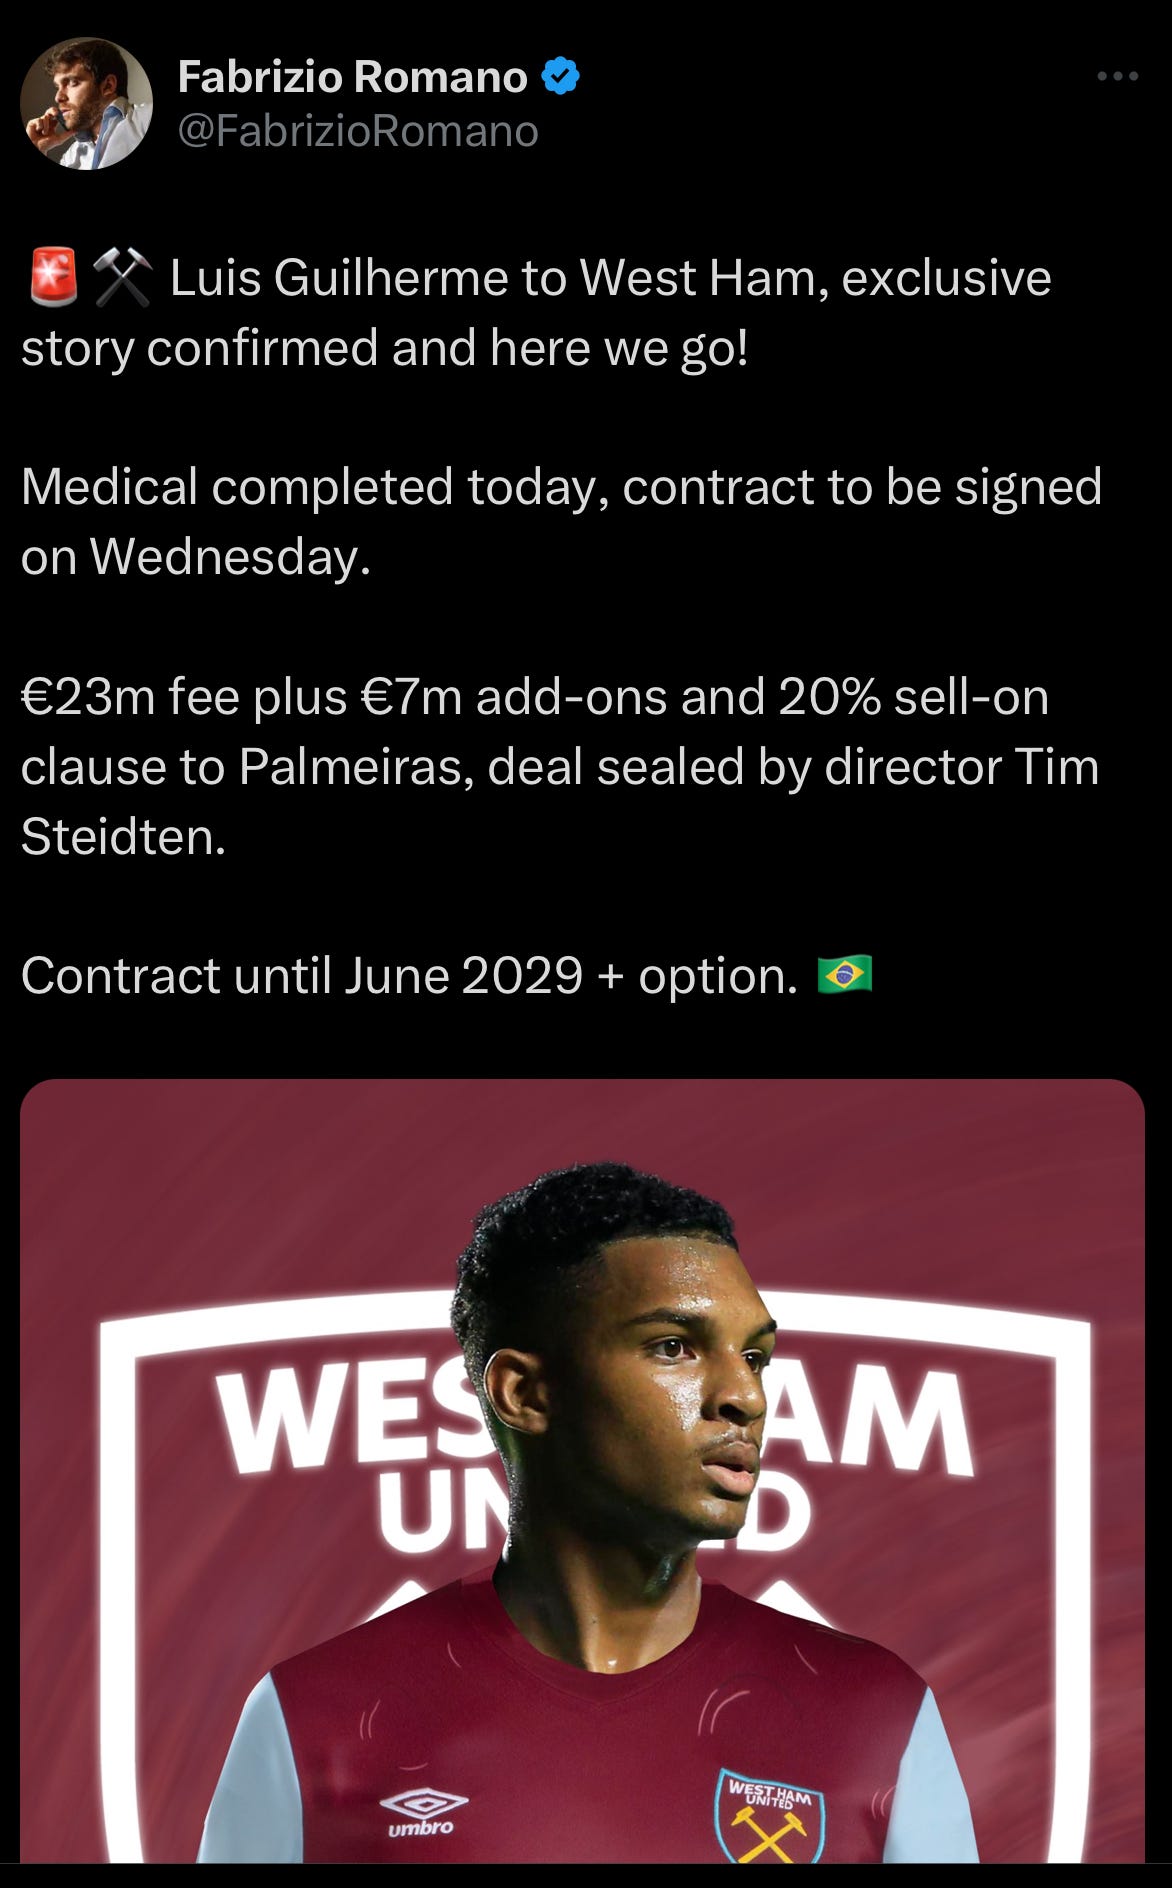 A tweet by Fabrizio Romano confirming Luis Guilherme's move to West Ham.